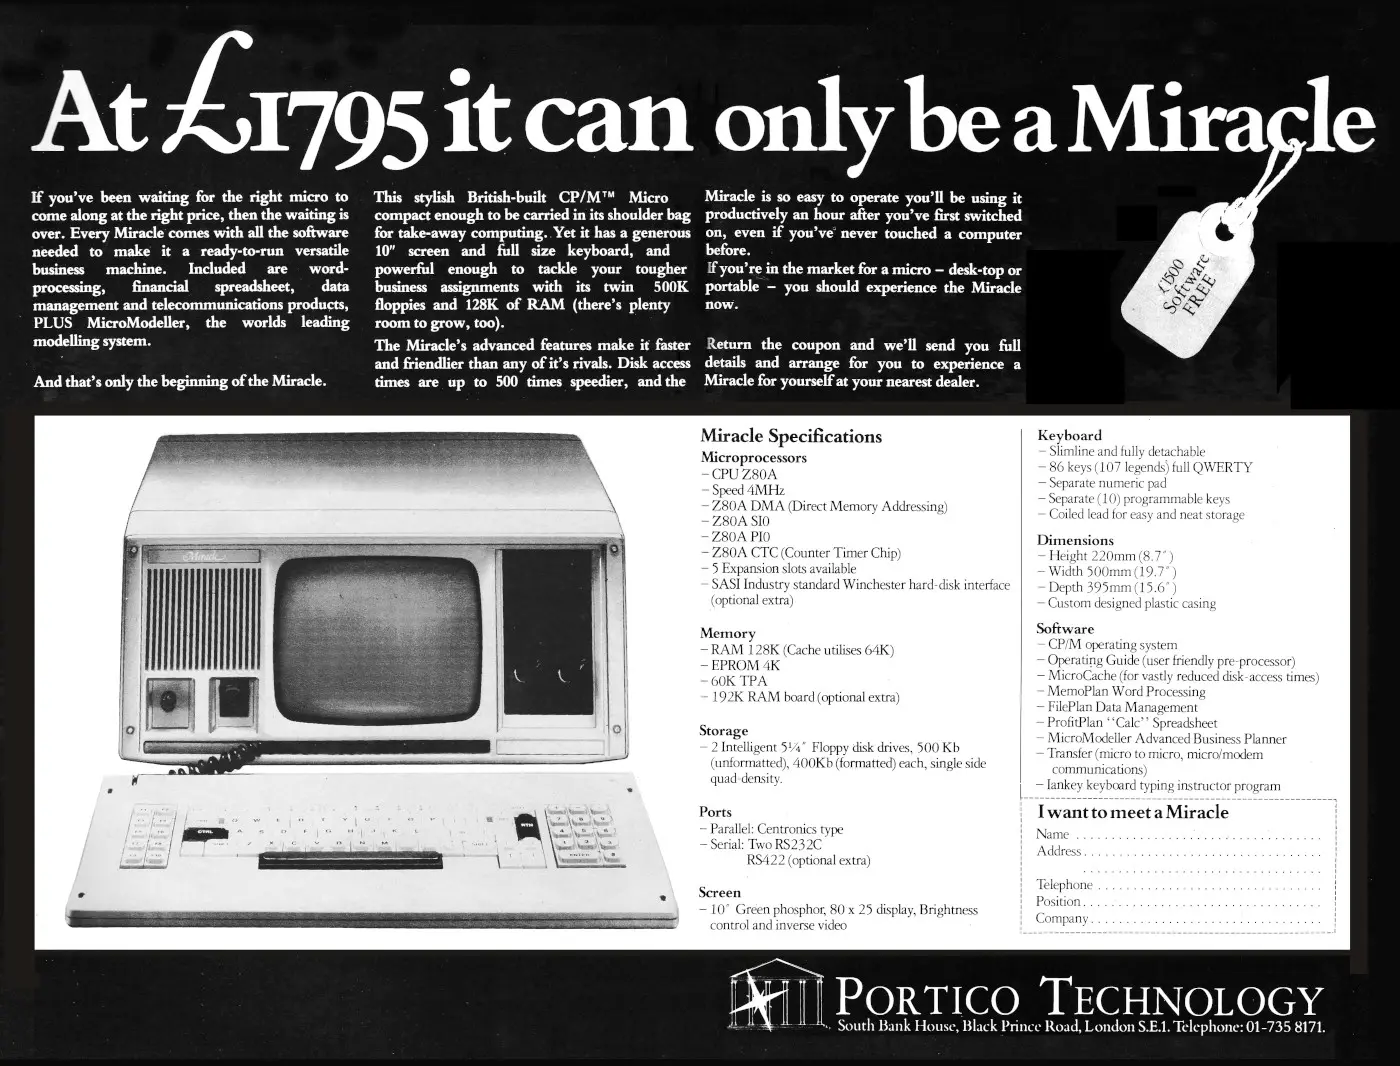 Portico Advert: At £1,795 it can only be a Miracle, from Personal Computer World, October 1983